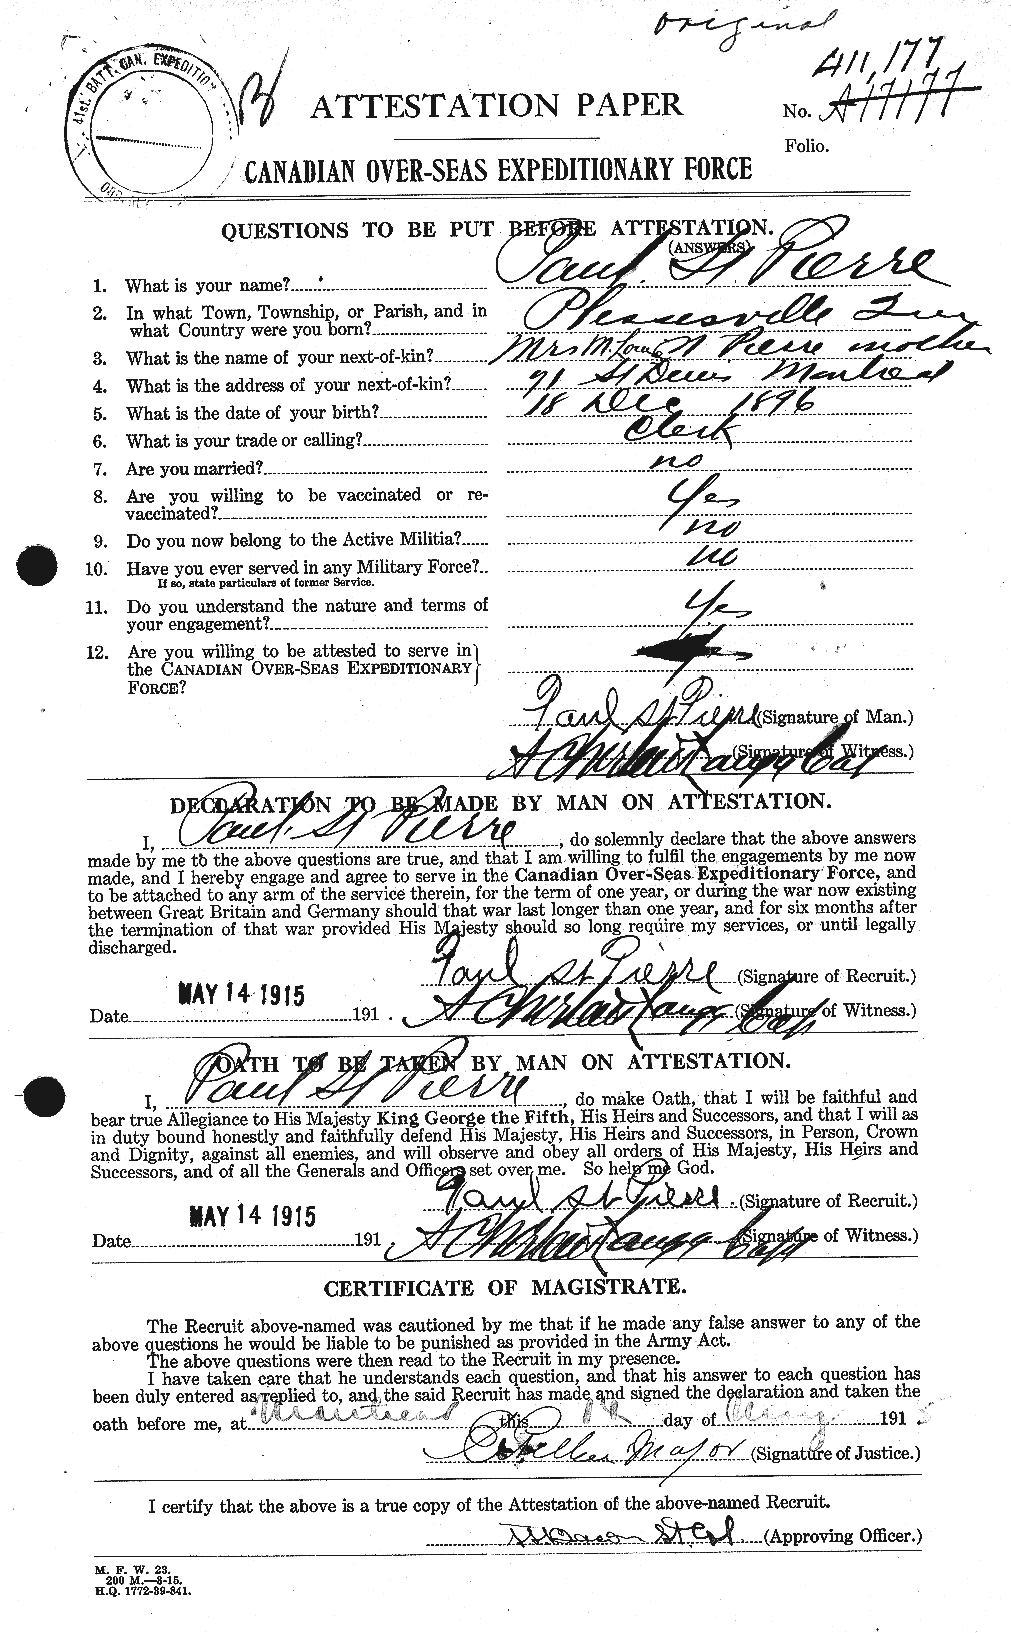 Personnel Records of the First World War - CEF 077576a